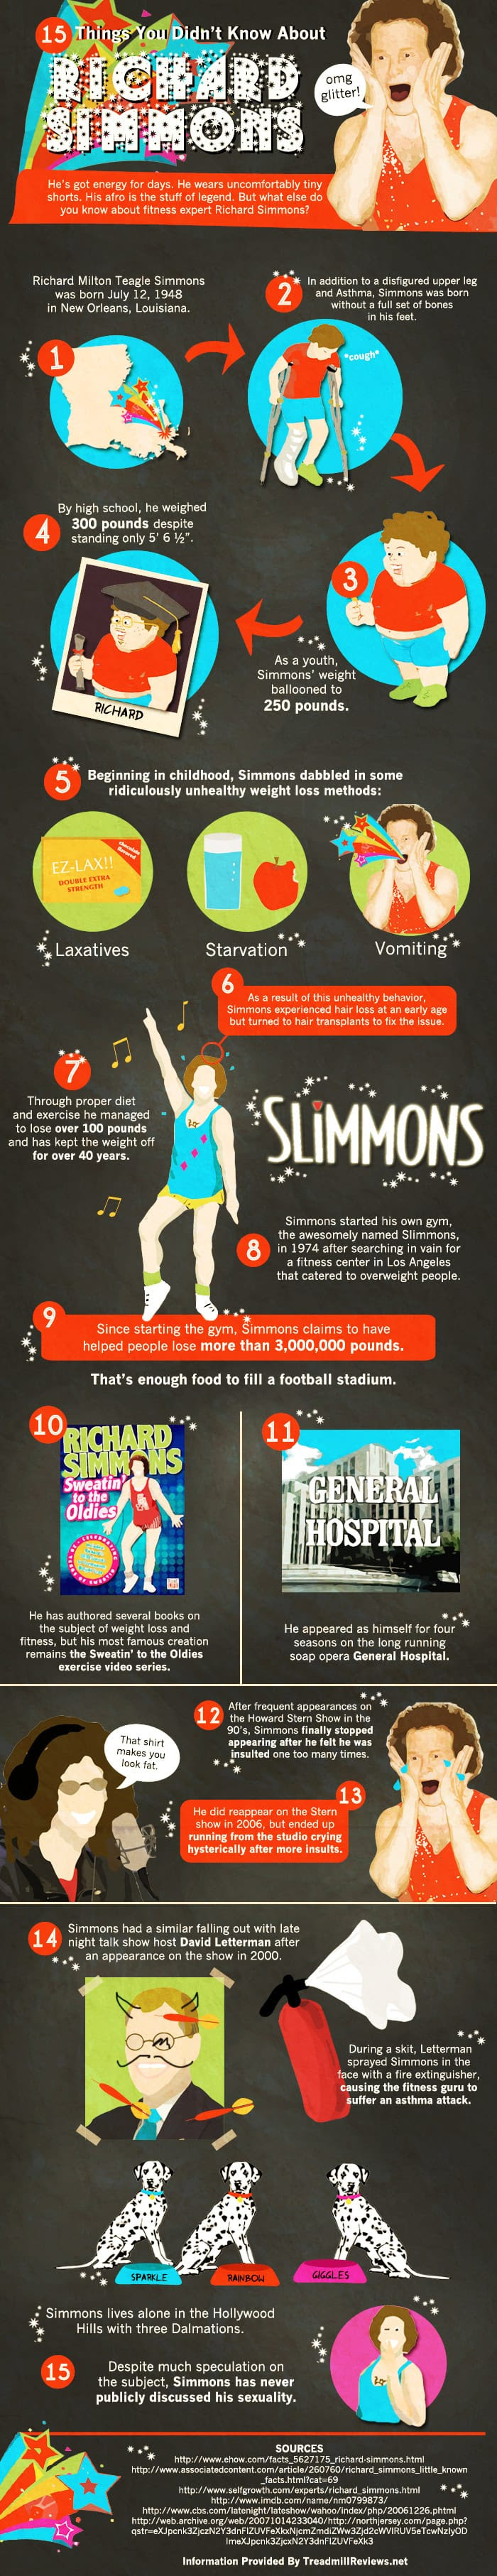 15 Facts About Richard Simmons you Douchebags